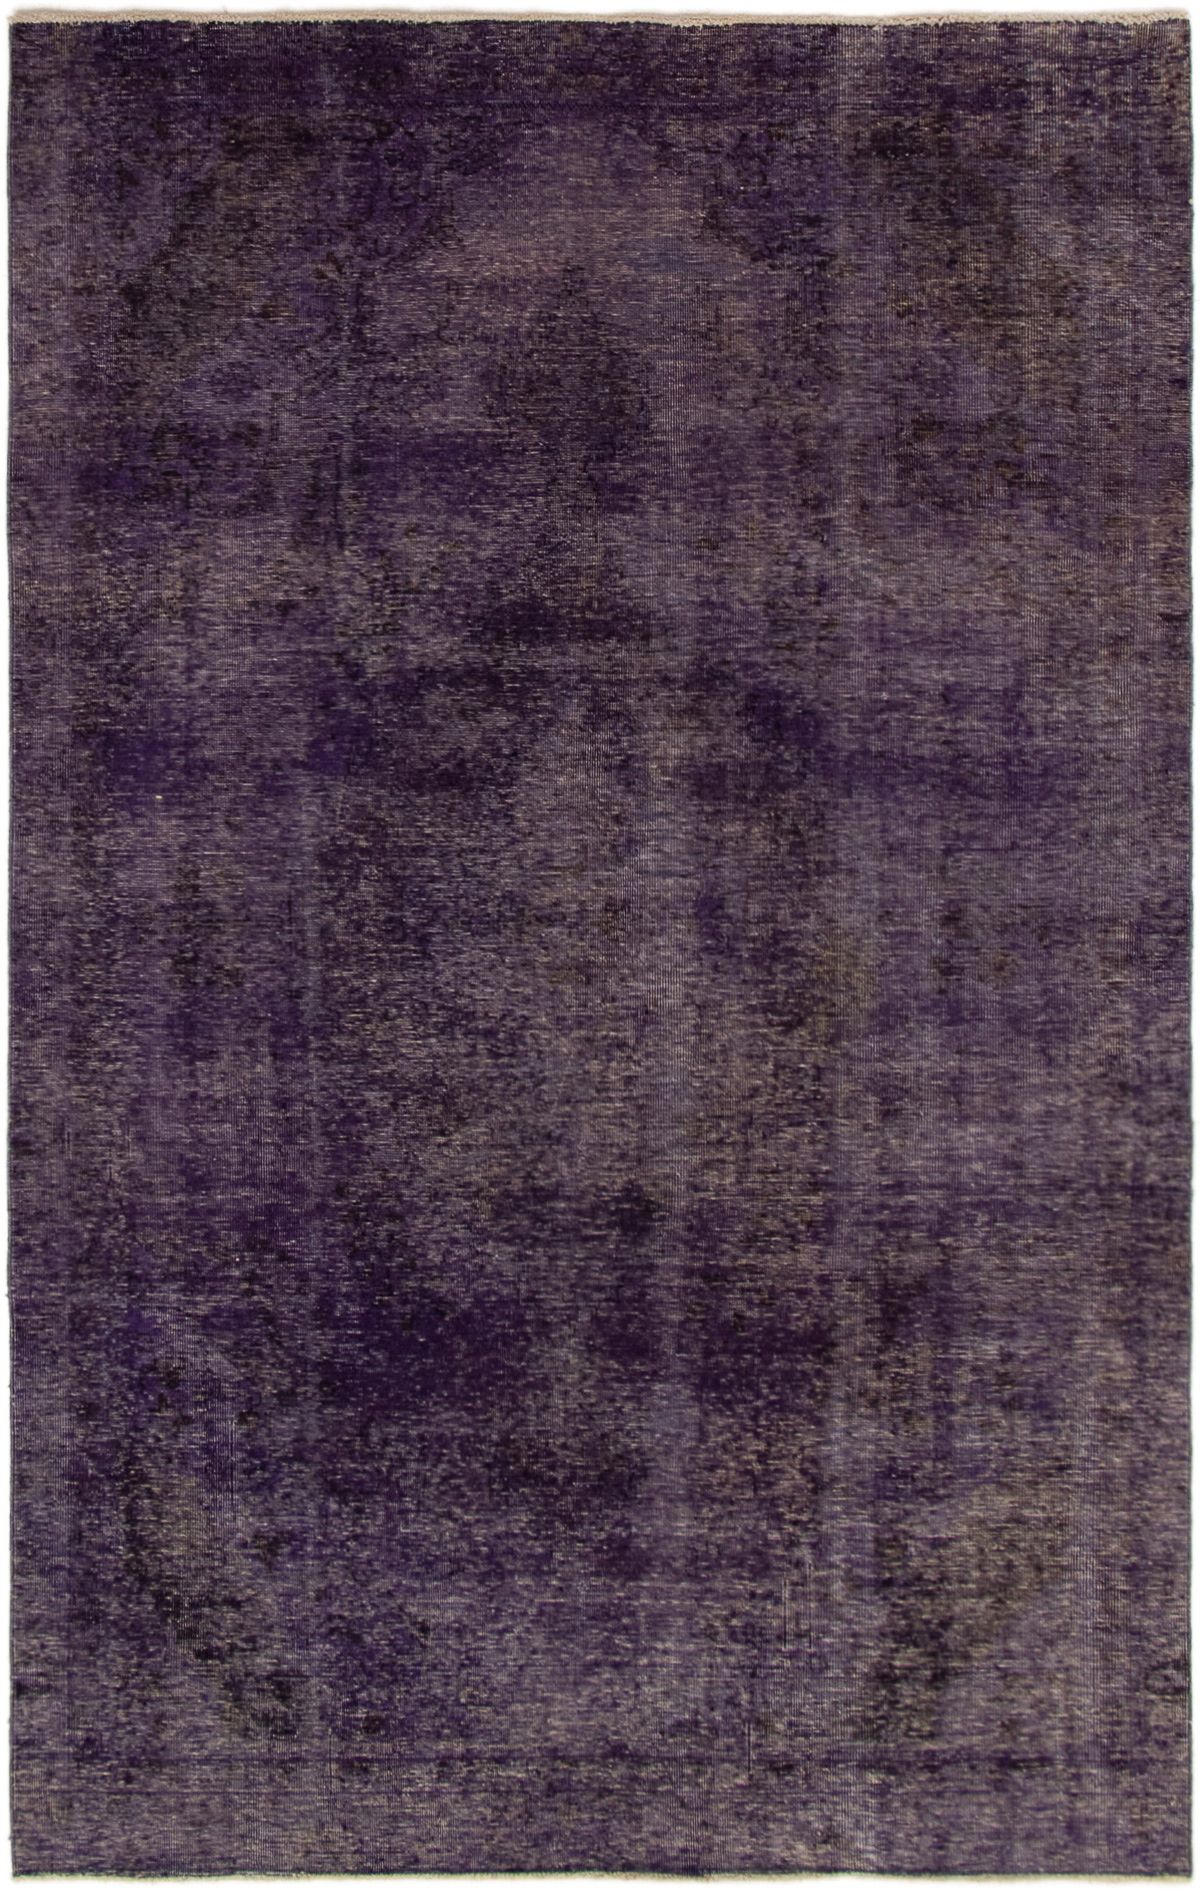 Hand-knotted Color Transition Purple Wool Rug 5'9" x 9'1" Size: 5'9" x 9'1"  